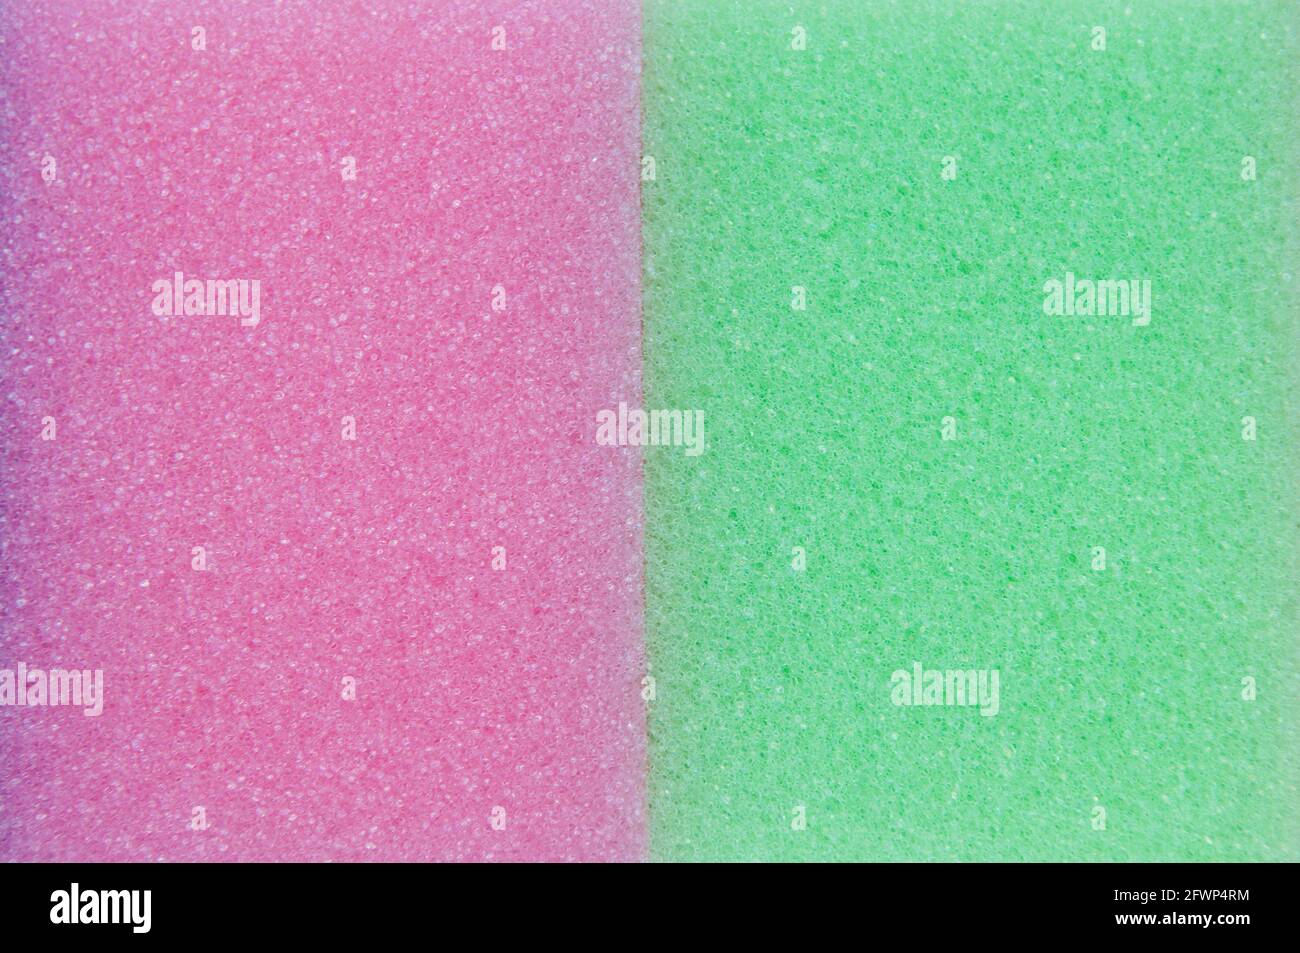 A Close Up Shot Of Two Washing Up Sponges, One Pink and One Green, Next To Each Other Stock Photo